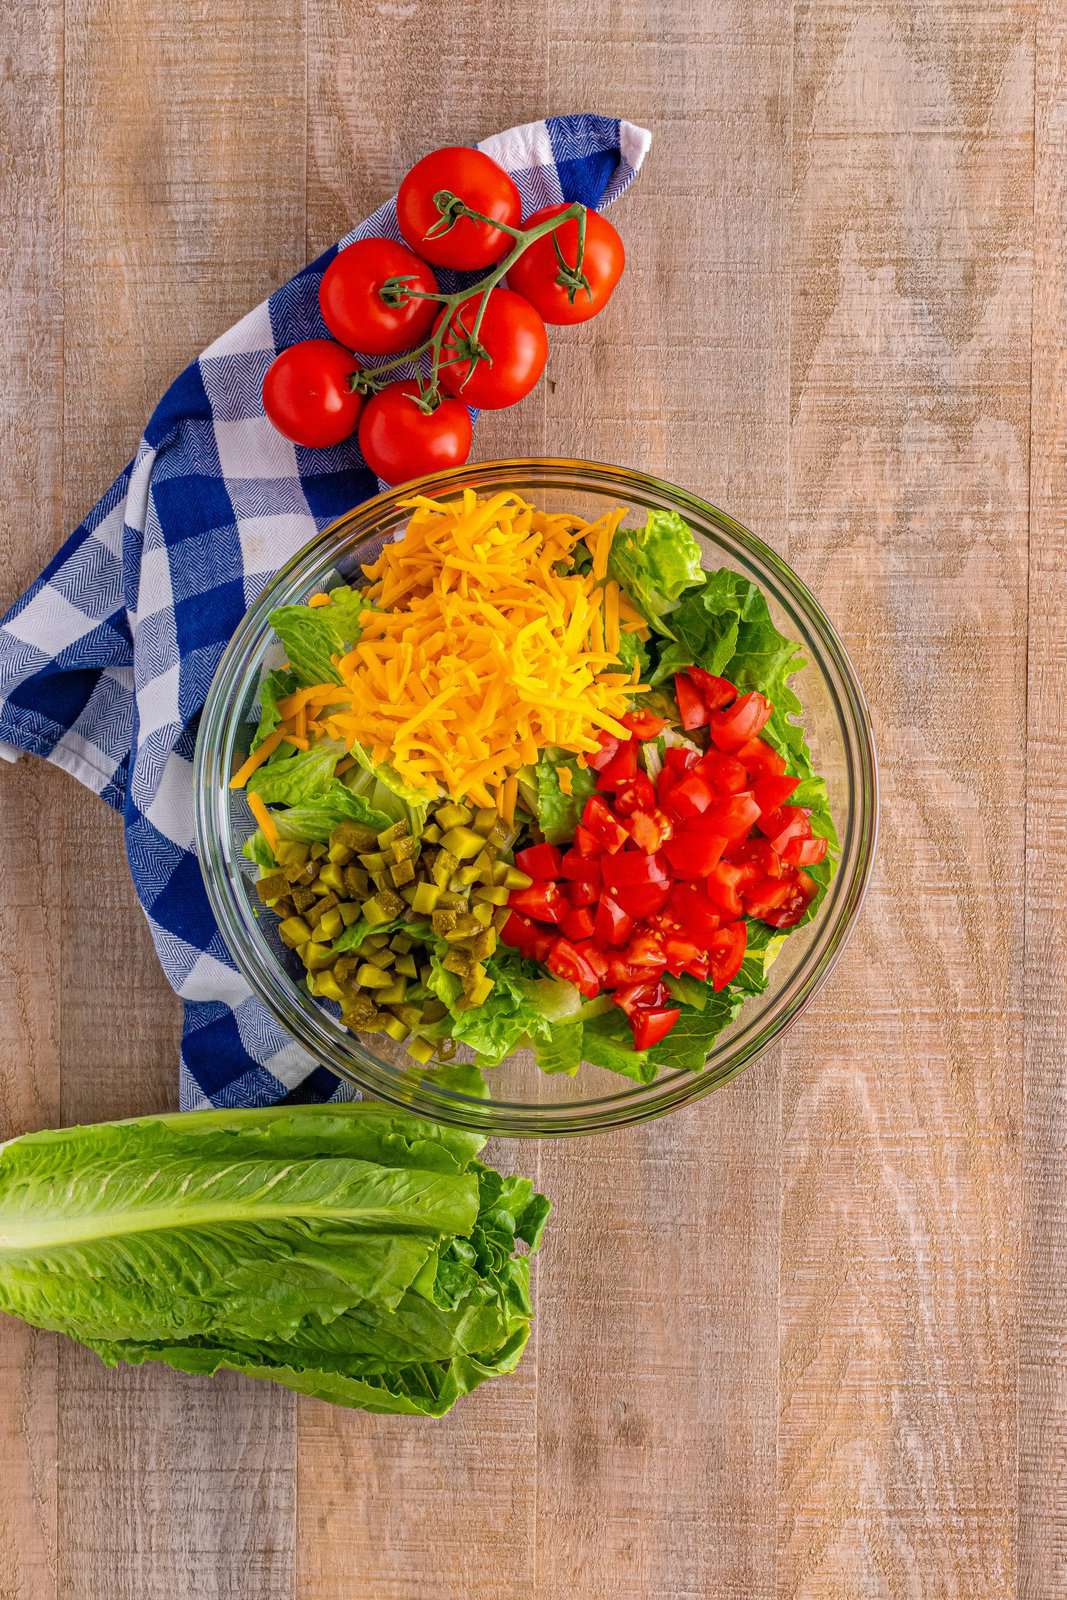 Big Mac salad ingredients shown in a large glass bowl. 